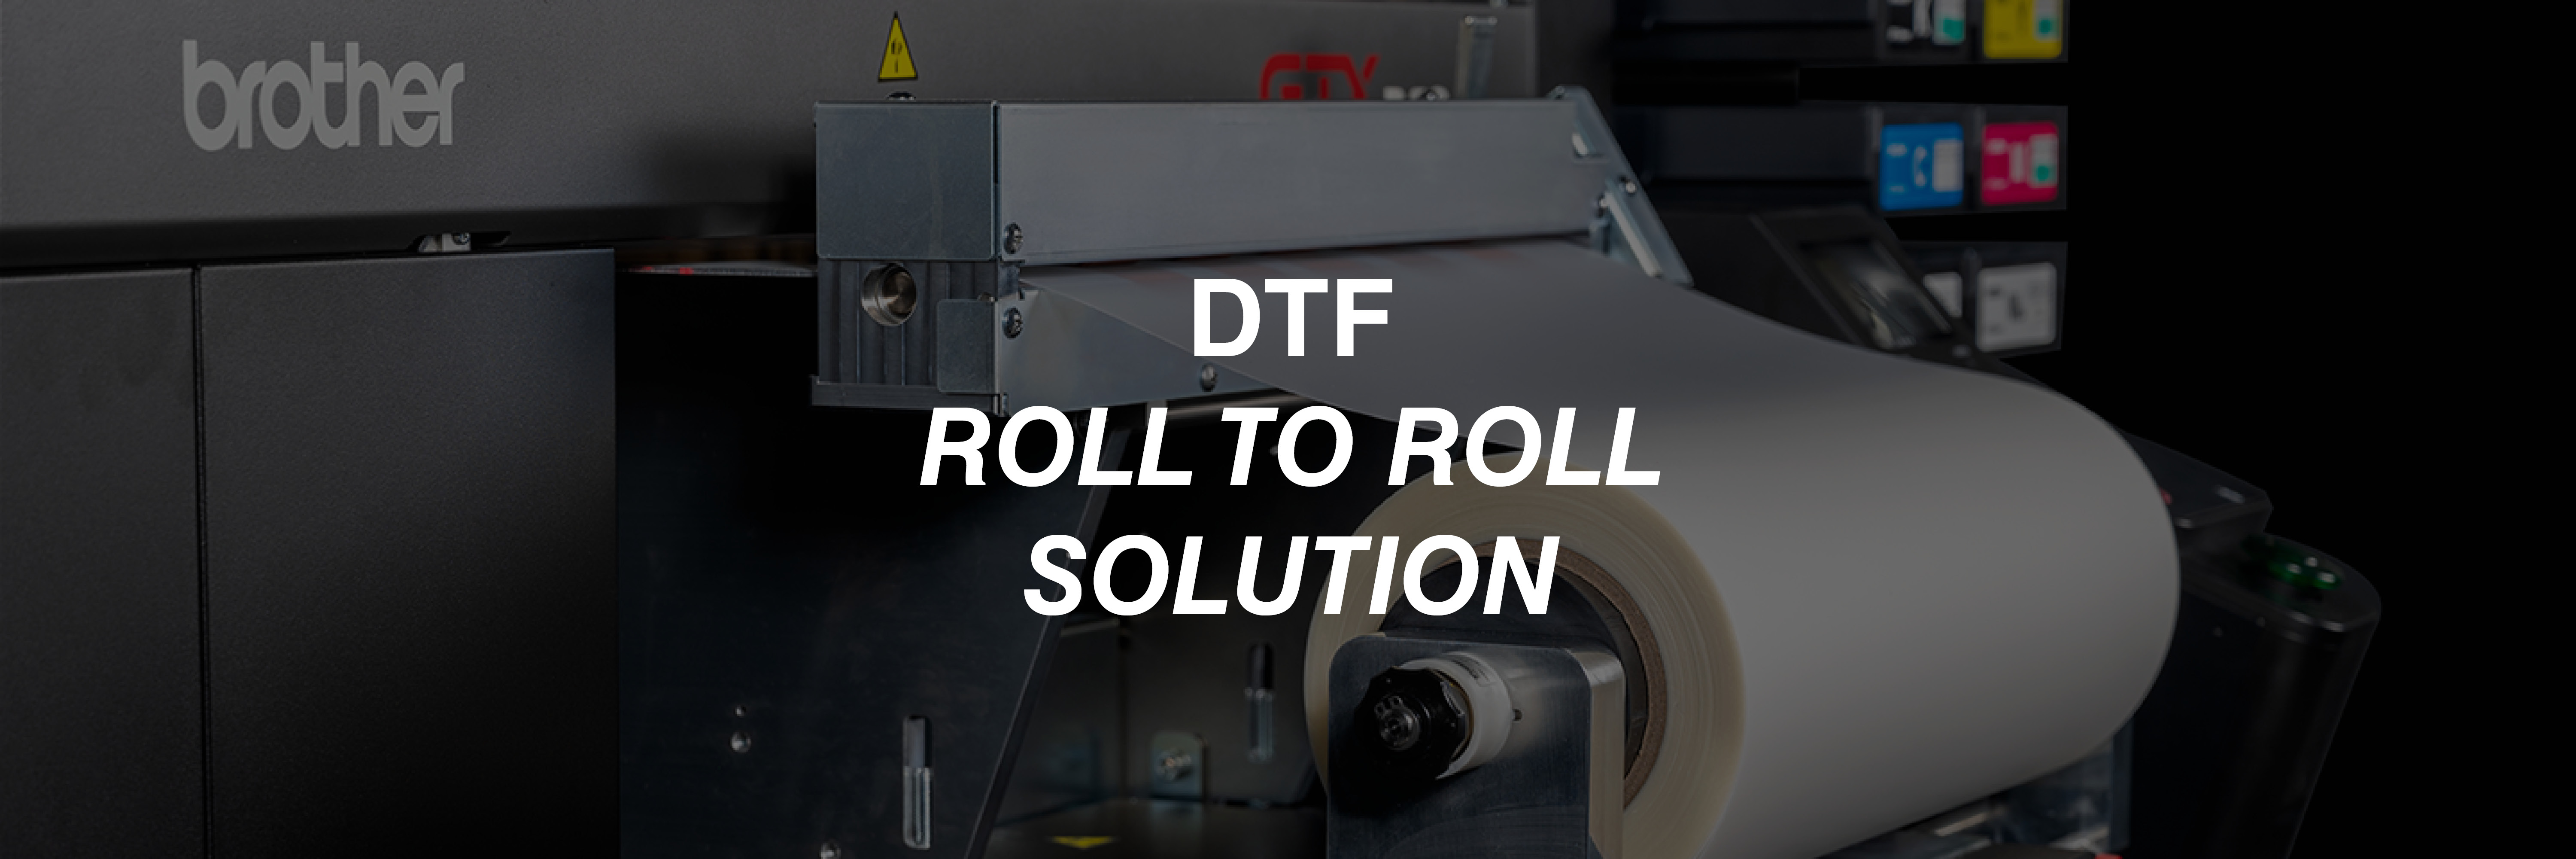 Brother DTF R2R Solution